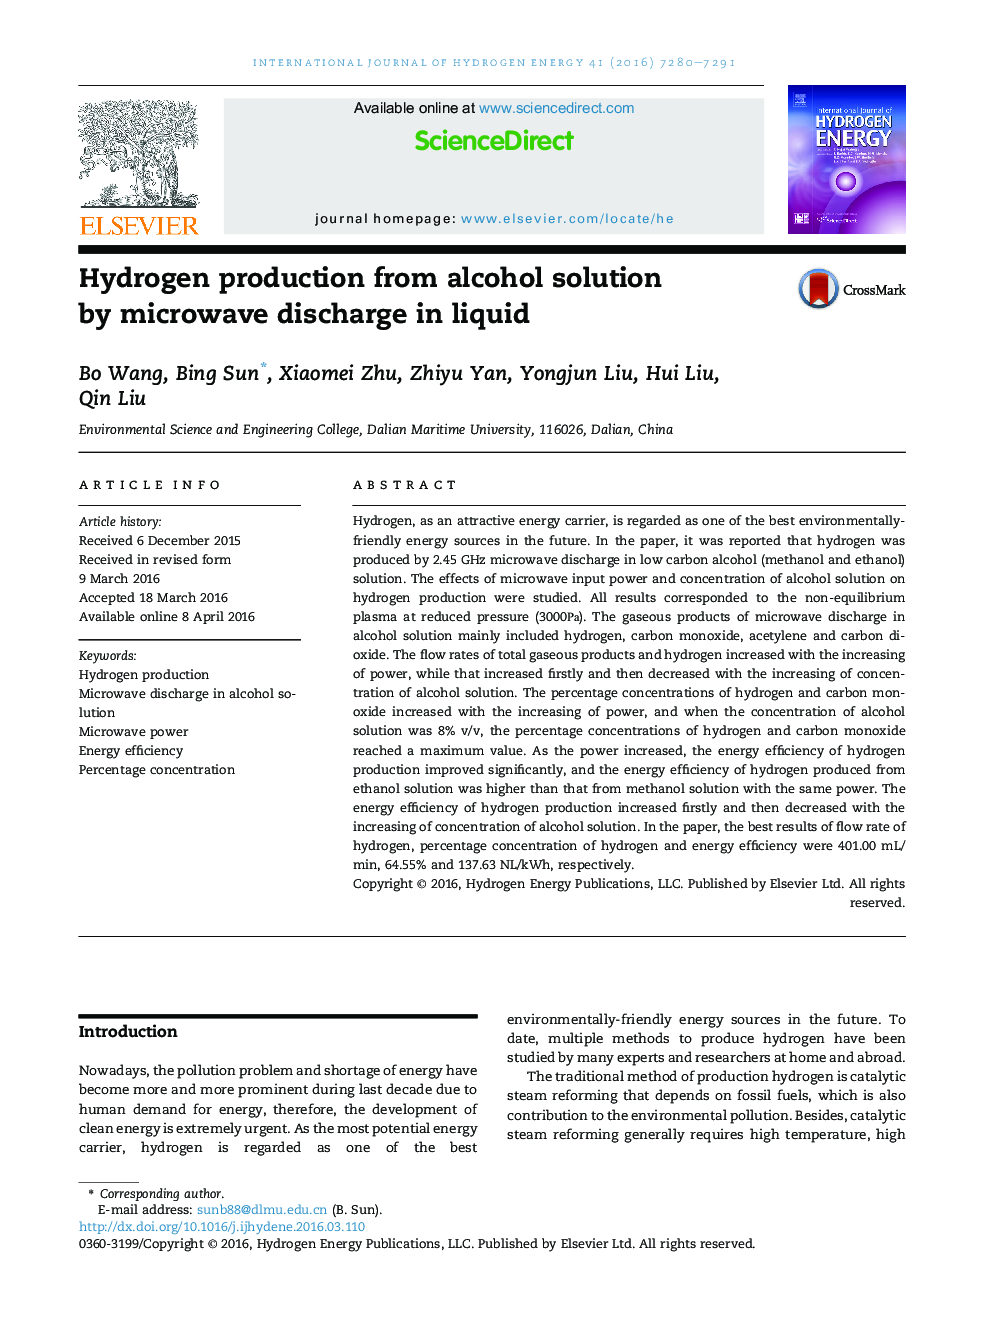 Hydrogen production from alcohol solution by microwave discharge in liquid